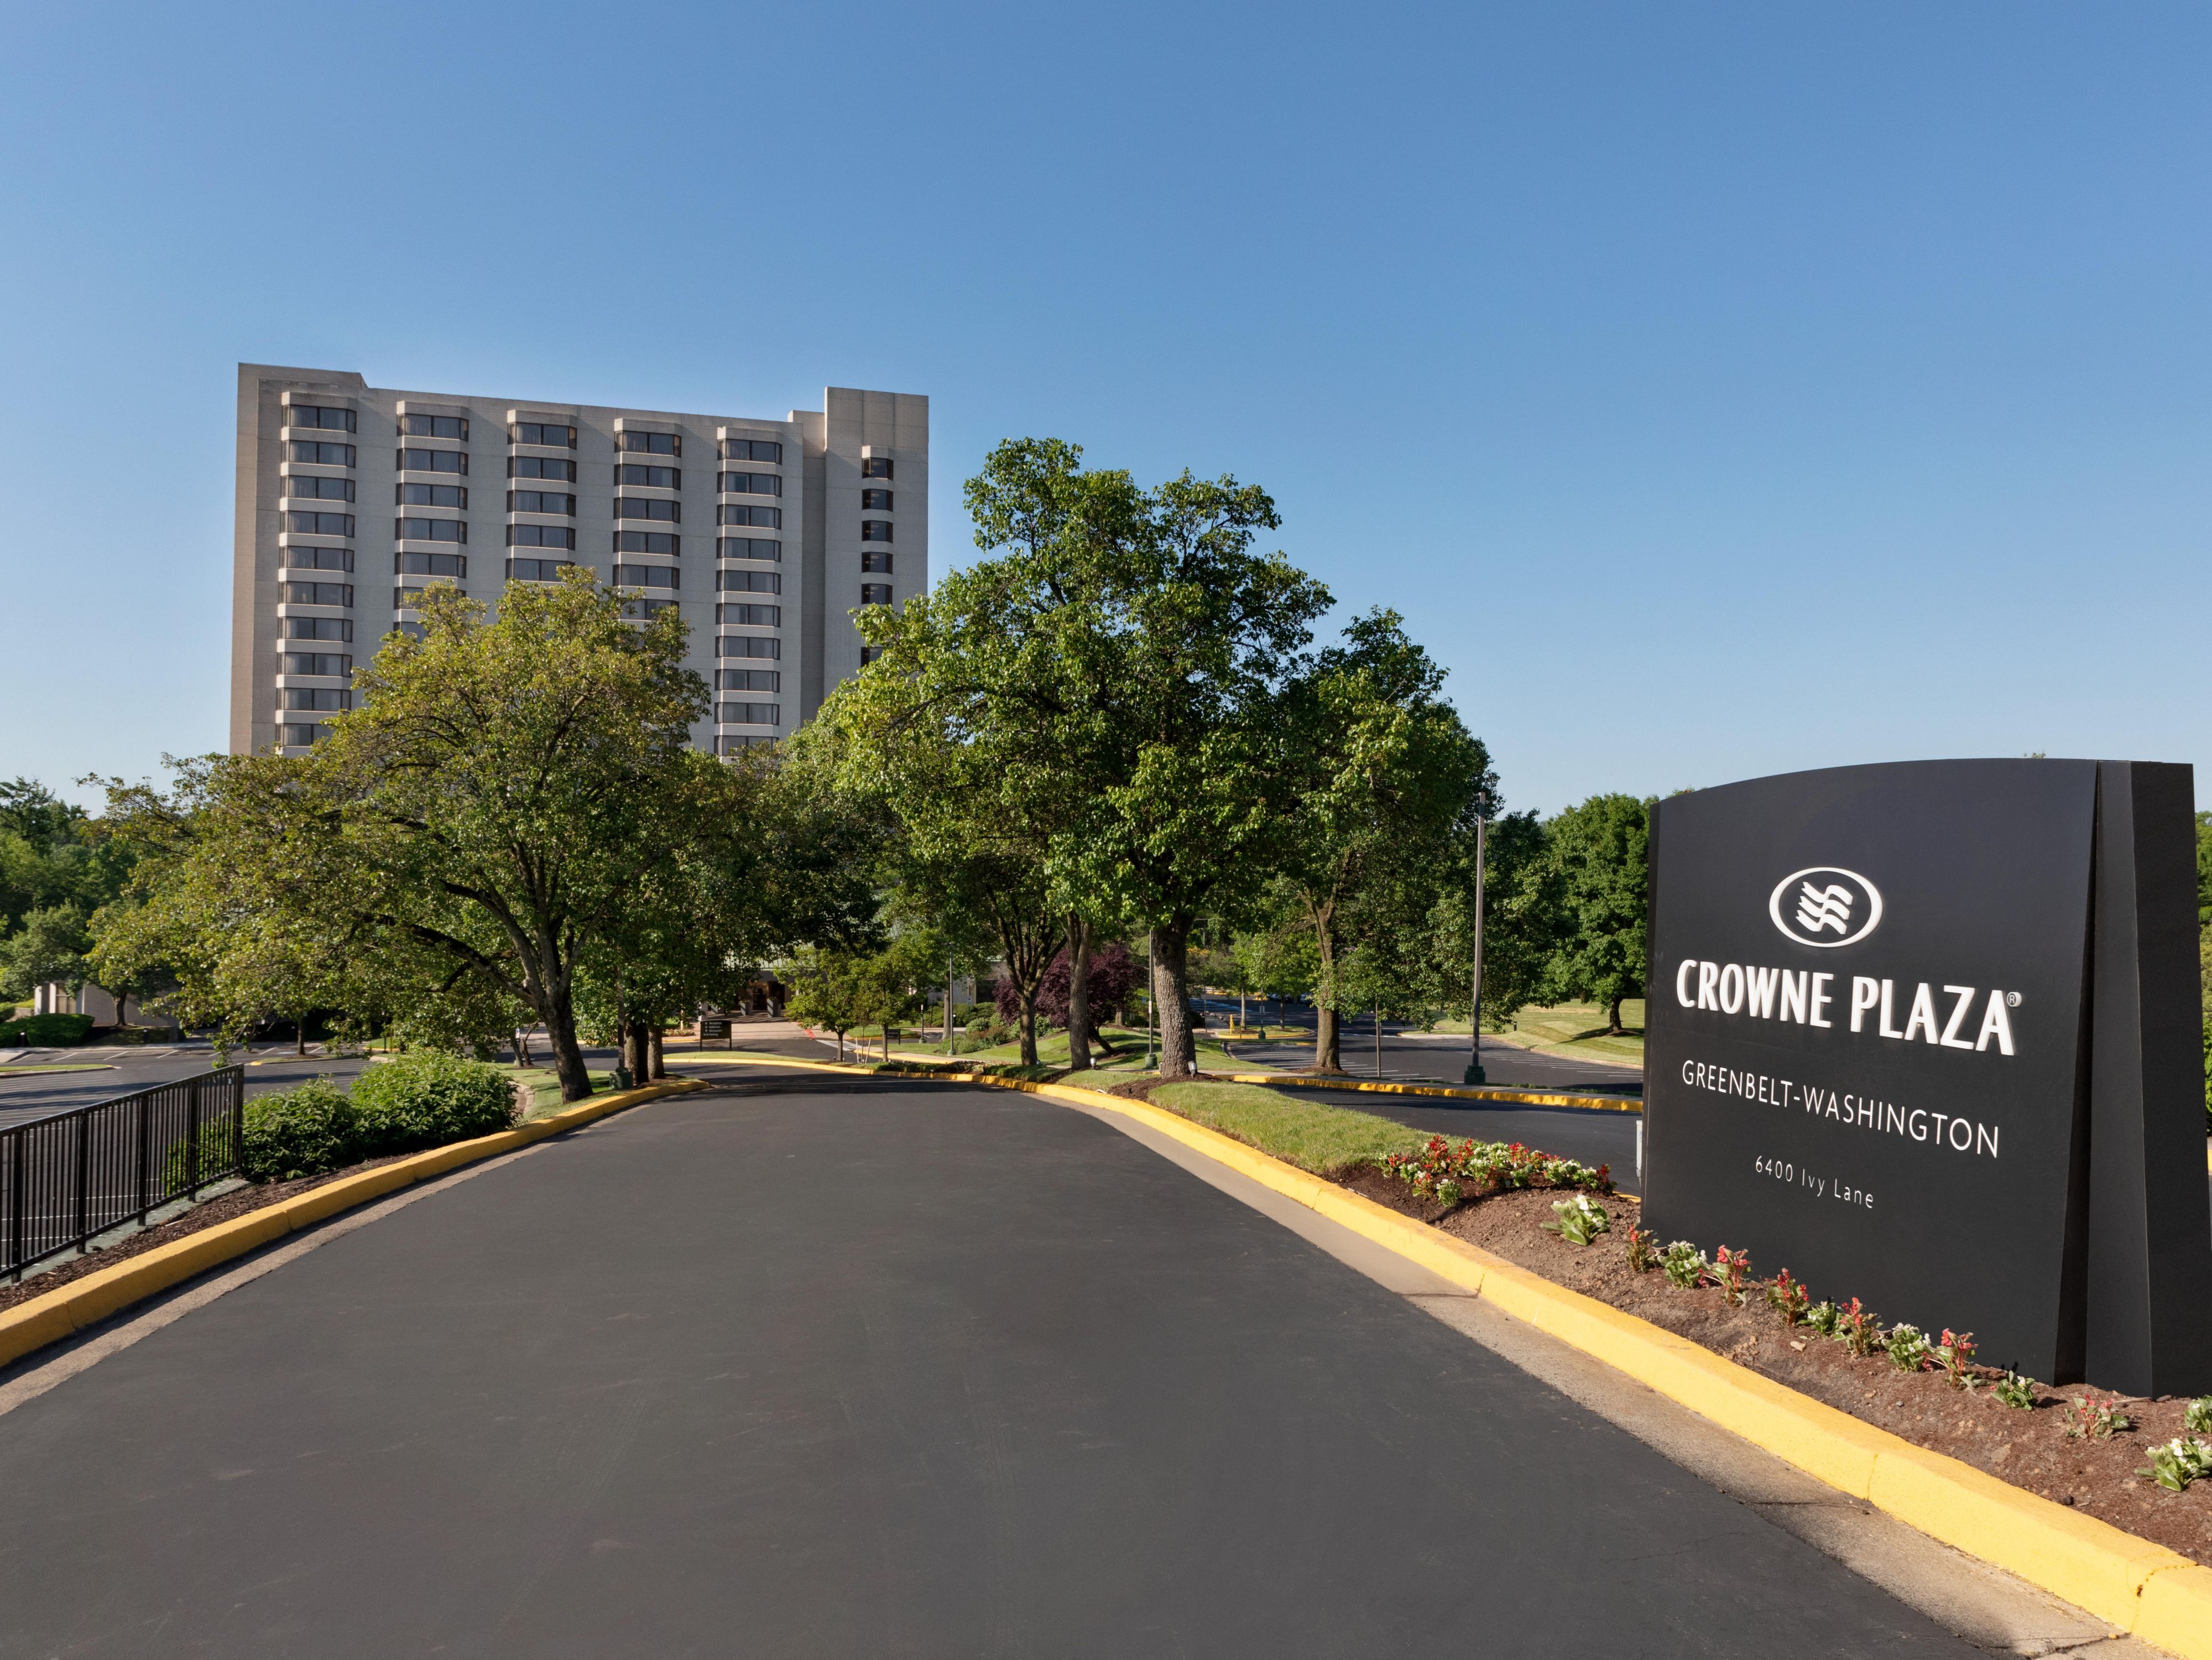 Situated close to the FedEx Field, Downtown D.C., Capital One Field, and the University of Maryland, our central location offers guests convenient access to sporting events, and other popular sites in and around Washington D.C., like the White House and Capitol Hill. 

